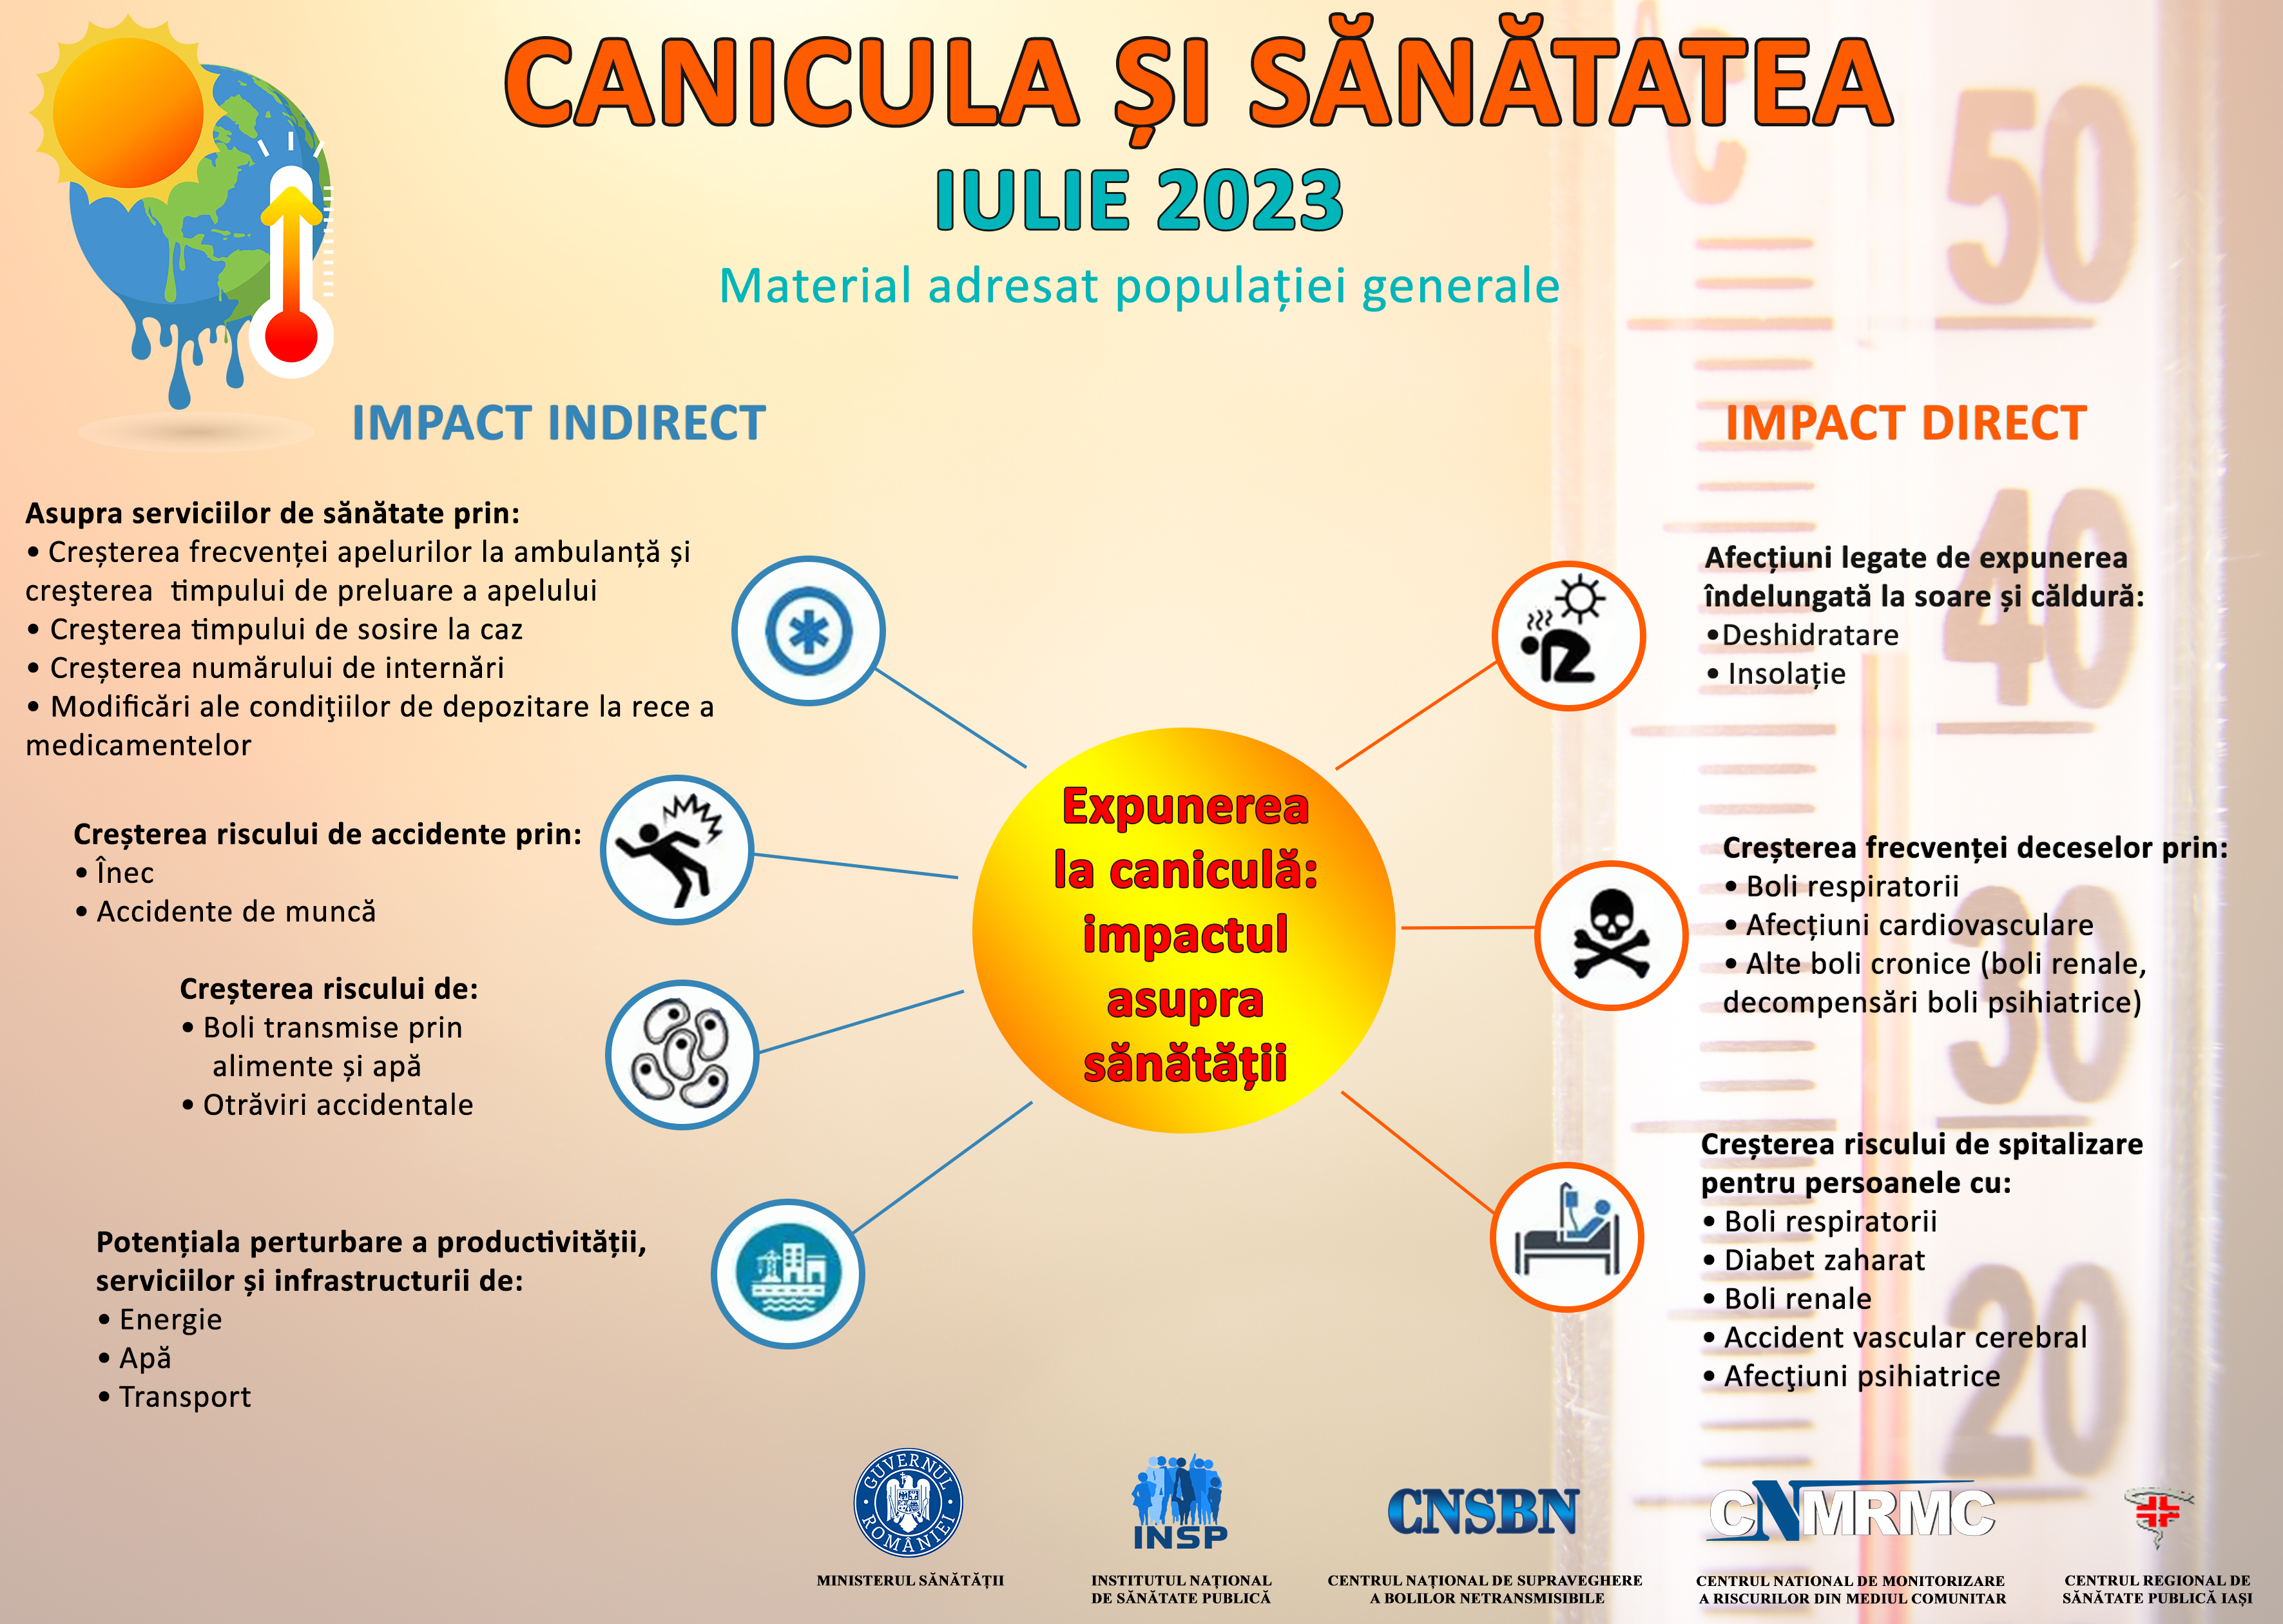 Poster Canicula